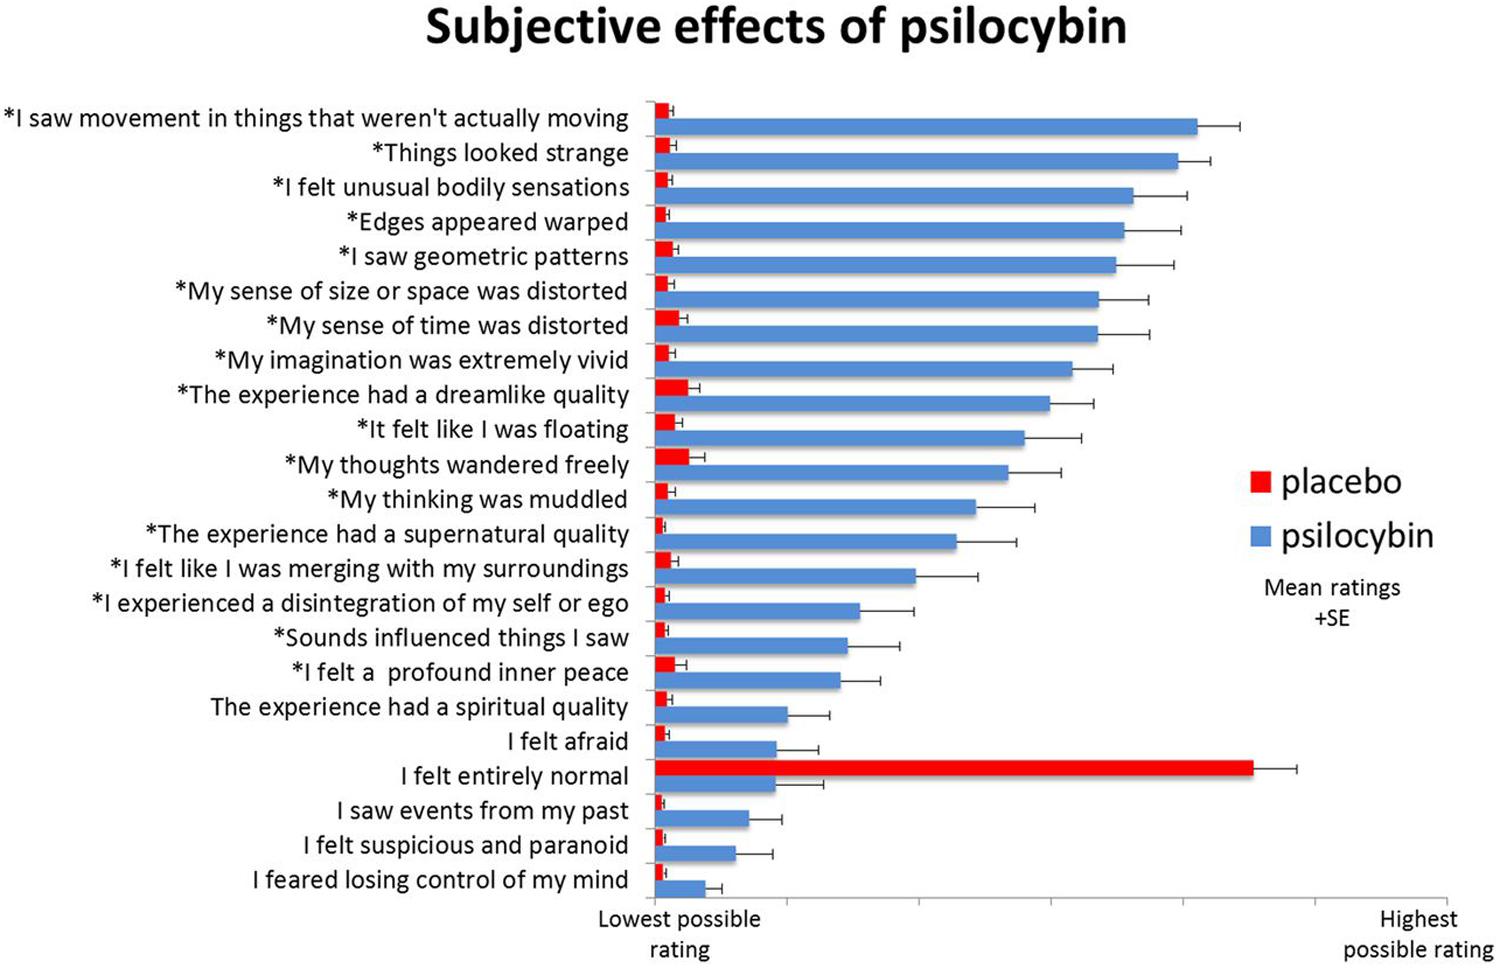 Figure 2: Subjective rating scale items selected after psilocybin (blue) and placebo (red) (n = 15) (Muthukumaraswamy et al., 2013). “Items were completed using a visual analog scale format, with a bottom anchor of ‘no, not more than usually’ and a top anchor of ‘yes, much more than usually’ for every item, with the exception of ‘I felt entirely normal,’ which had bottom and top anchors of ‘No, I experienced a different state altogether’ and ‘Yes, I felt just as I normally do,’ respectively. Shown are the mean ratings for 15 participants plus the positive SEMs. All items marked with an asterisk were scored significantly higher after psilocybin than placebo infusion at a Bonferroni-corrected significance level of p < 0.0022 (0.5/23 items)” (Muthukumaraswamy et al., 2013, 15176).